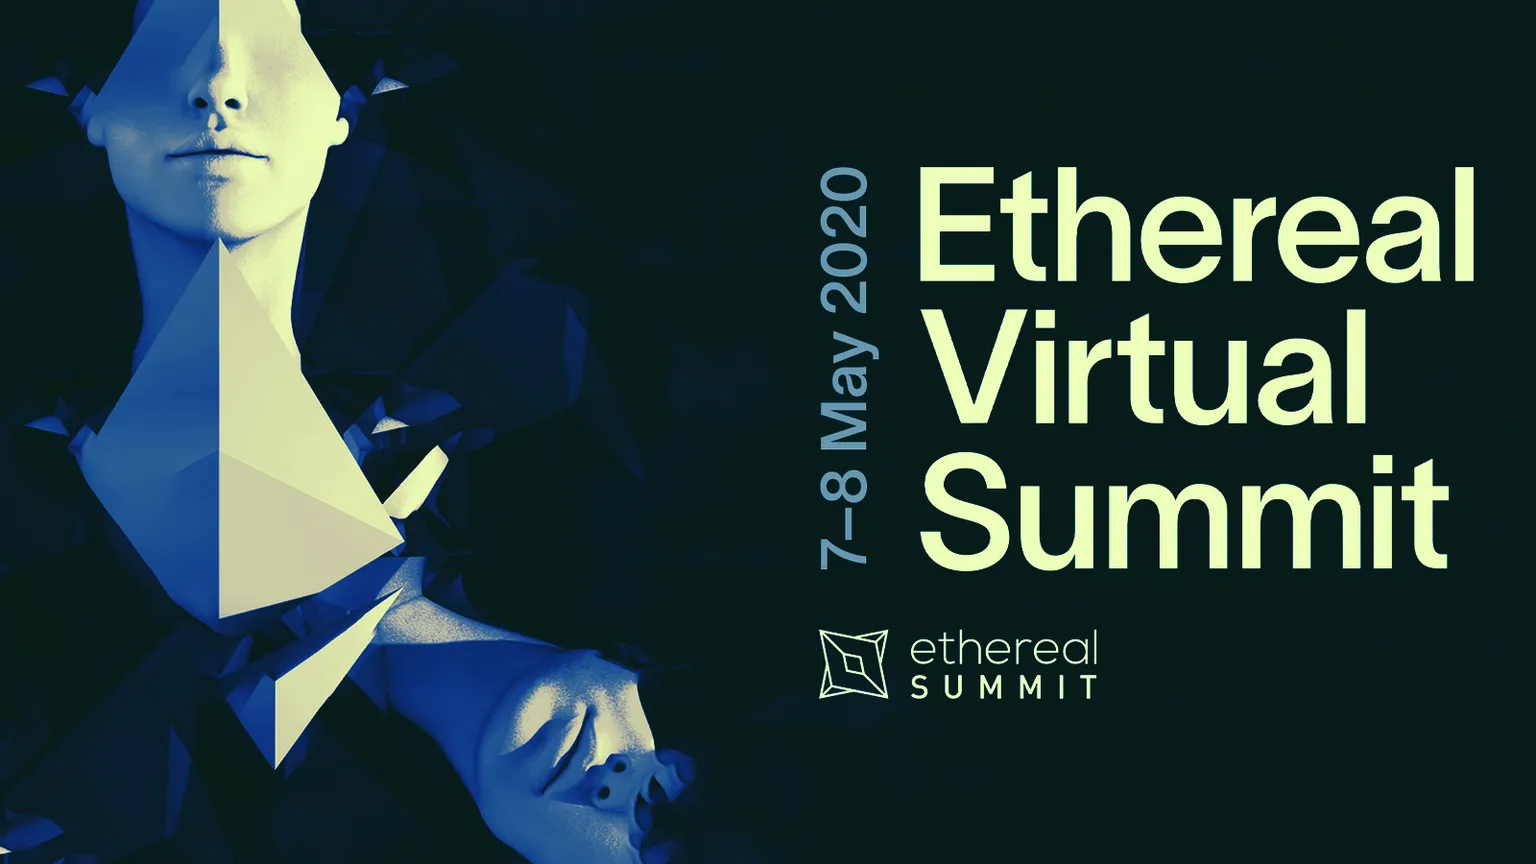 Ethereal Virtual Summit goes online in May. Image: Ethereal.